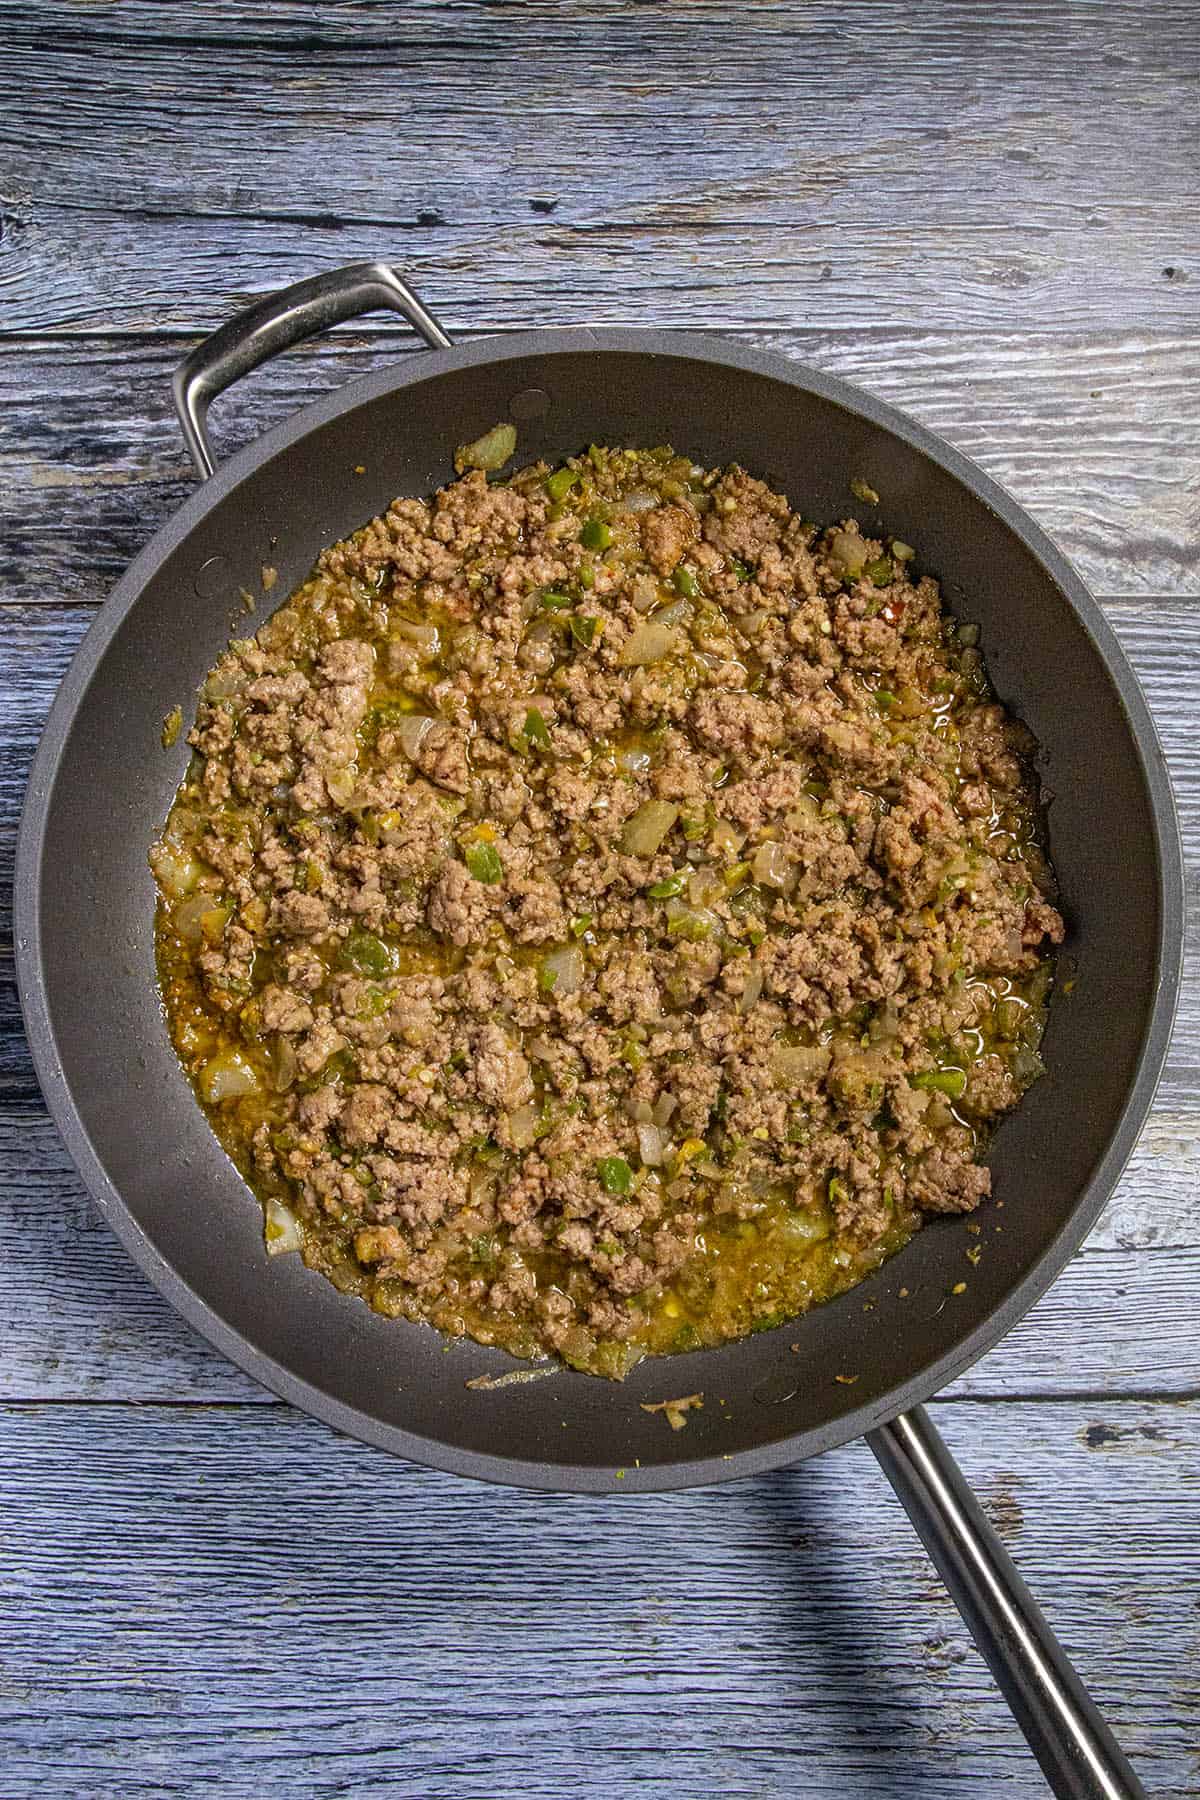 Cooking down ground beef to make Sloppy Joes